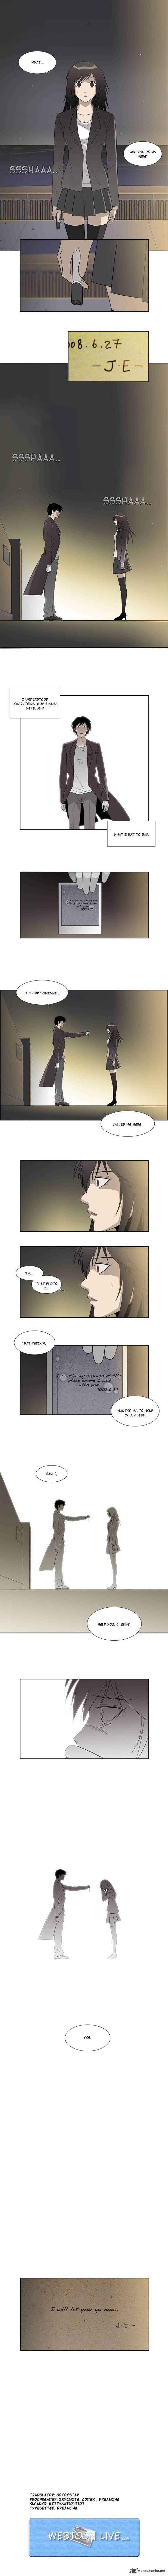 Melo Holic Chapter 14 Page 6